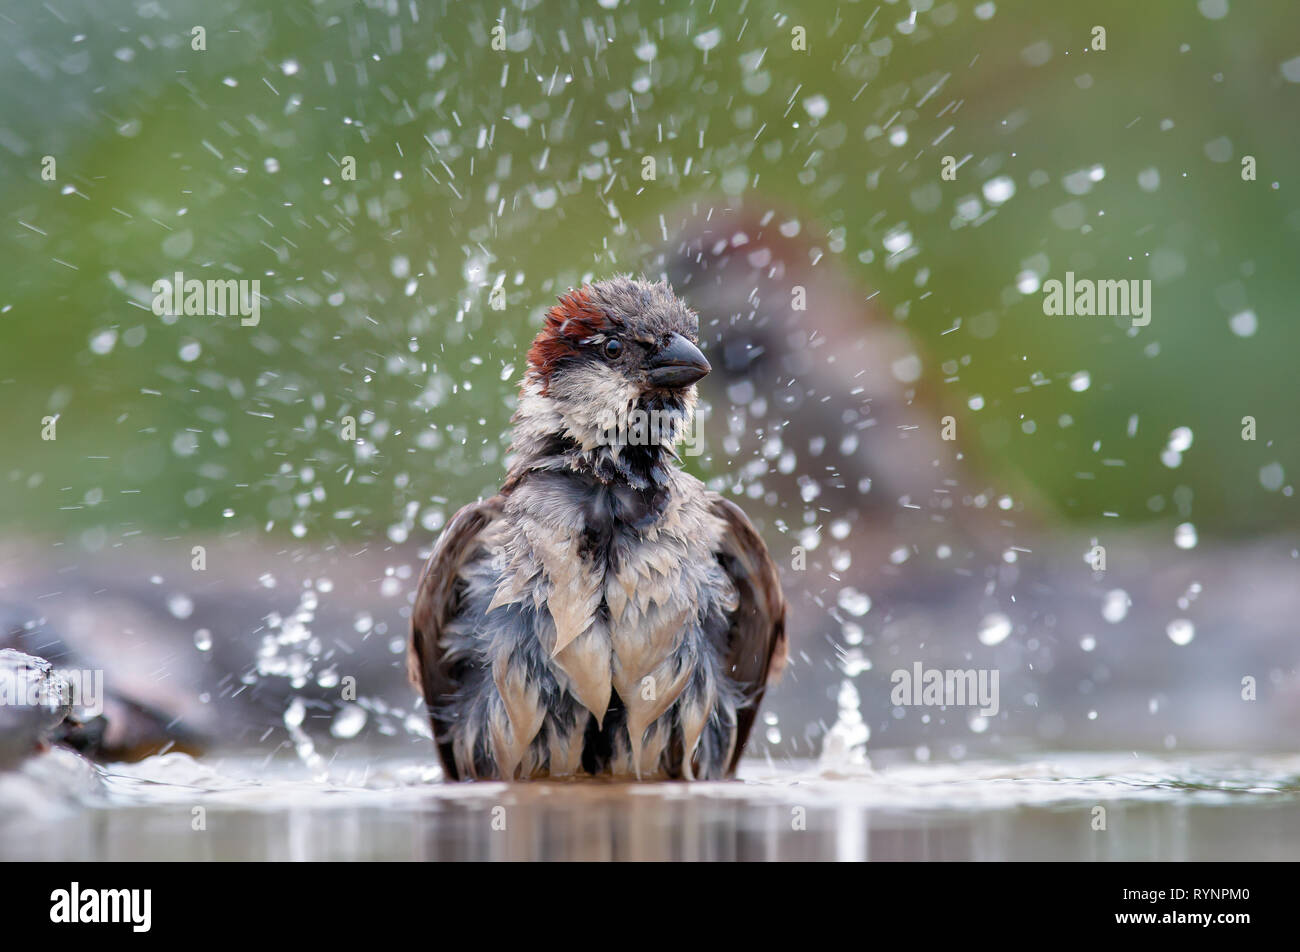 House sparrow bathing with a lot of drips Stock Photo